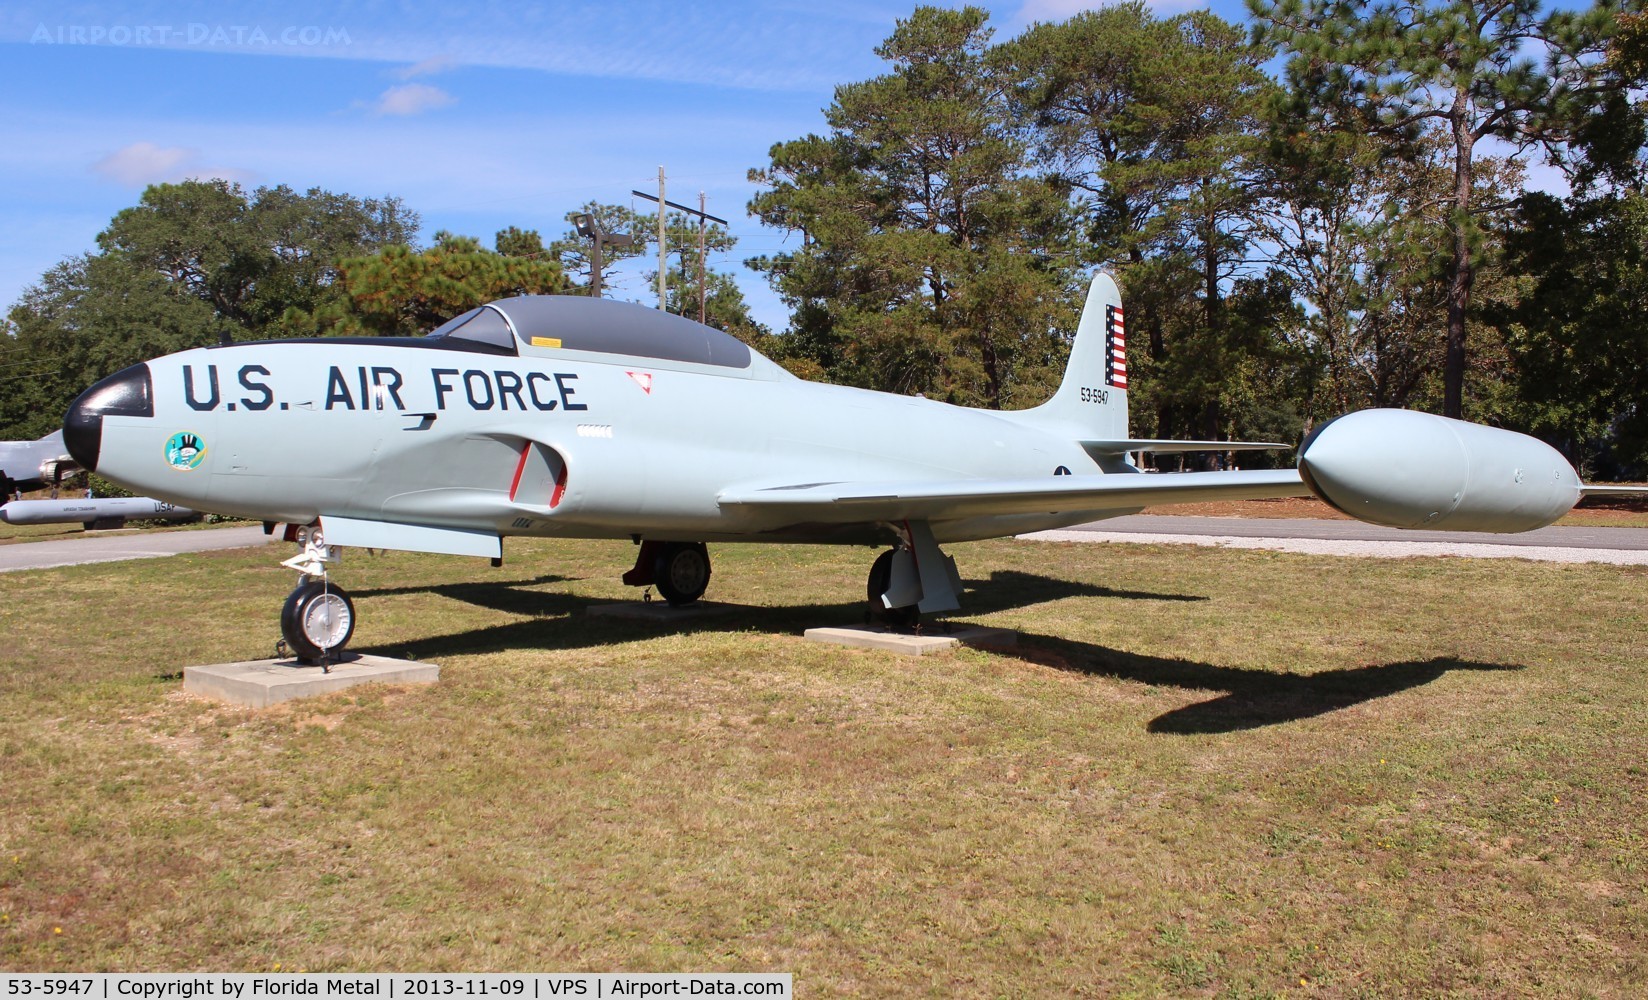 53-5947, 1953 Lockheed T-33A-1-LO Shooting Star C/N 580-9423, T-33A Shooting Star at USAF Armament Museum